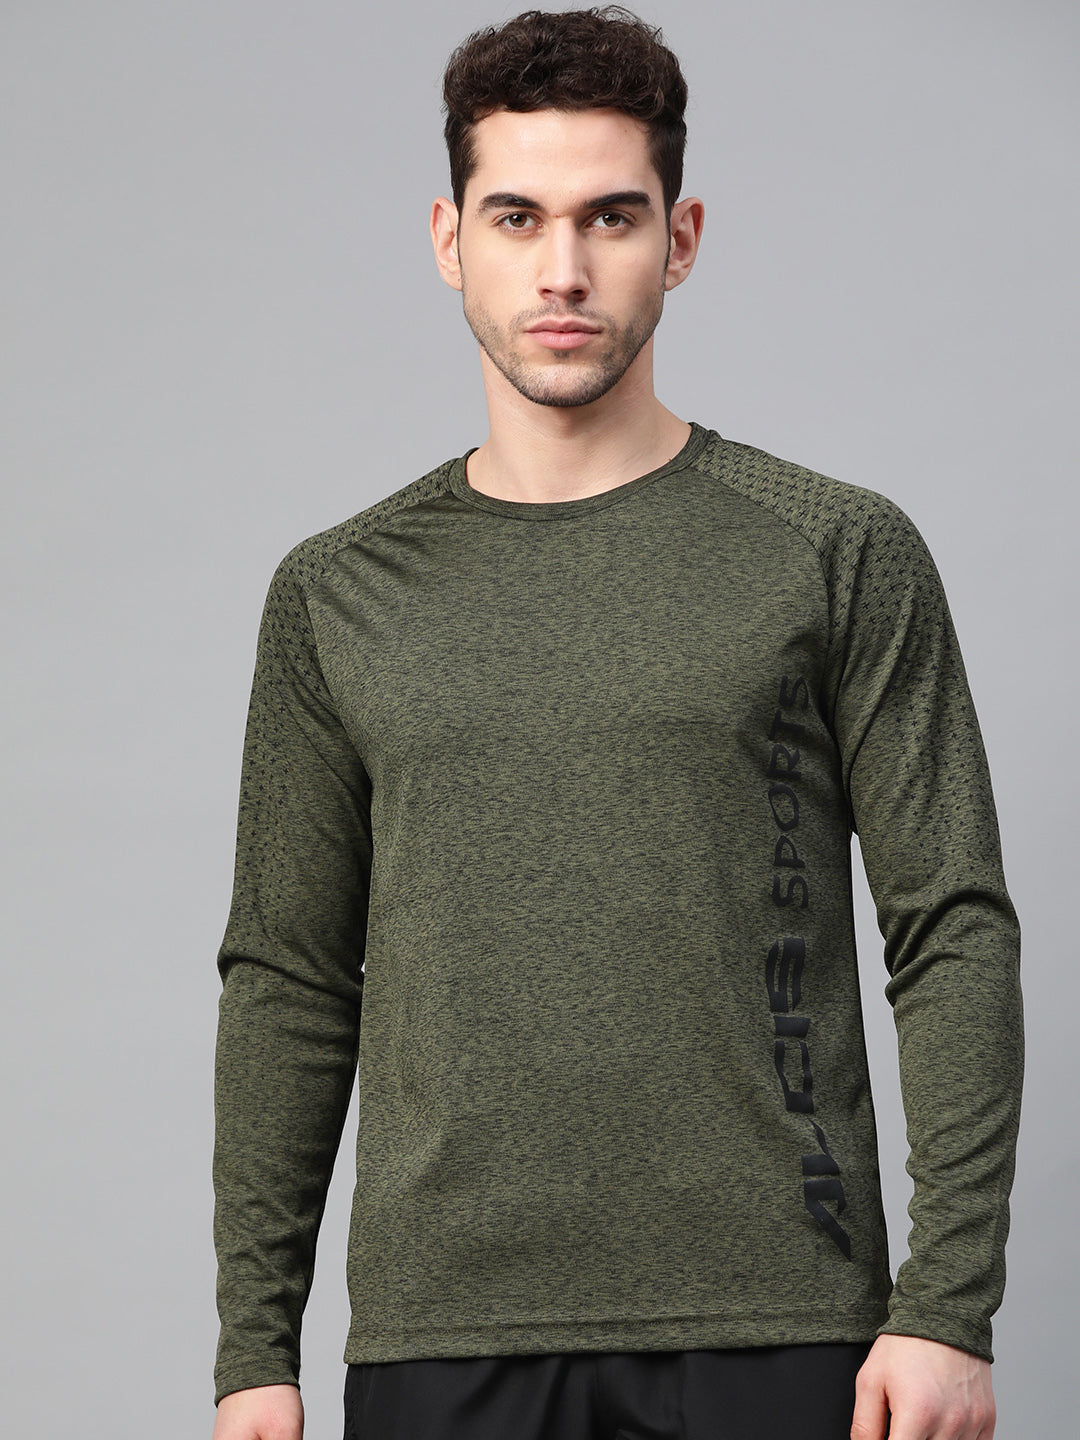 Alcis Men Olive Green  Black Grindle Effect Printed Round Neck Sports T-shirt